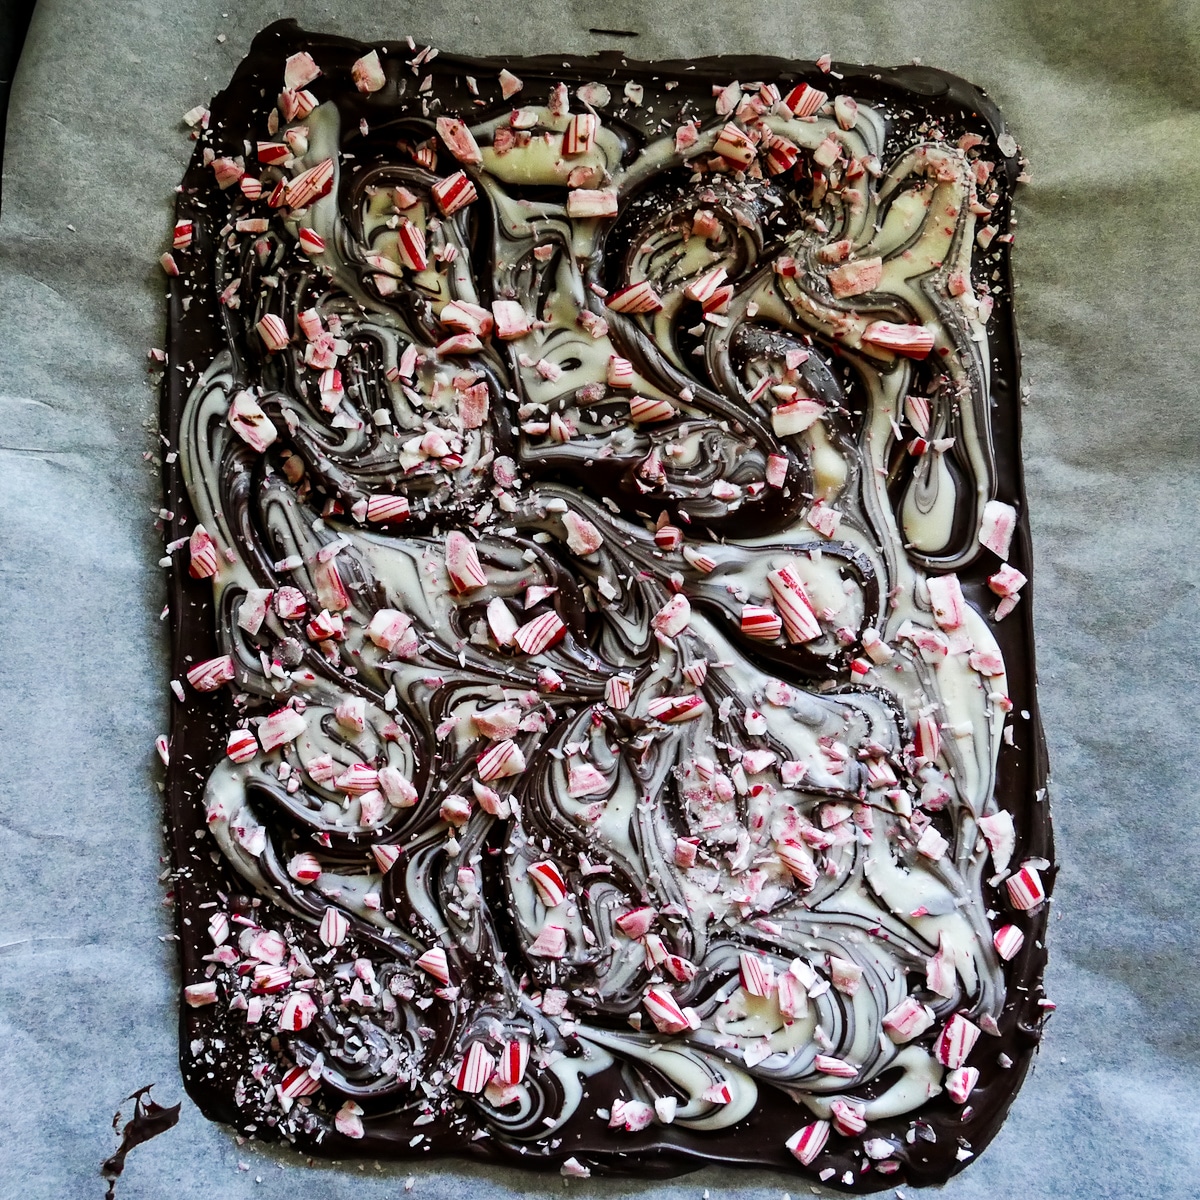 melted white chocolate and peppermint candies swirled on top of dark chocolate.